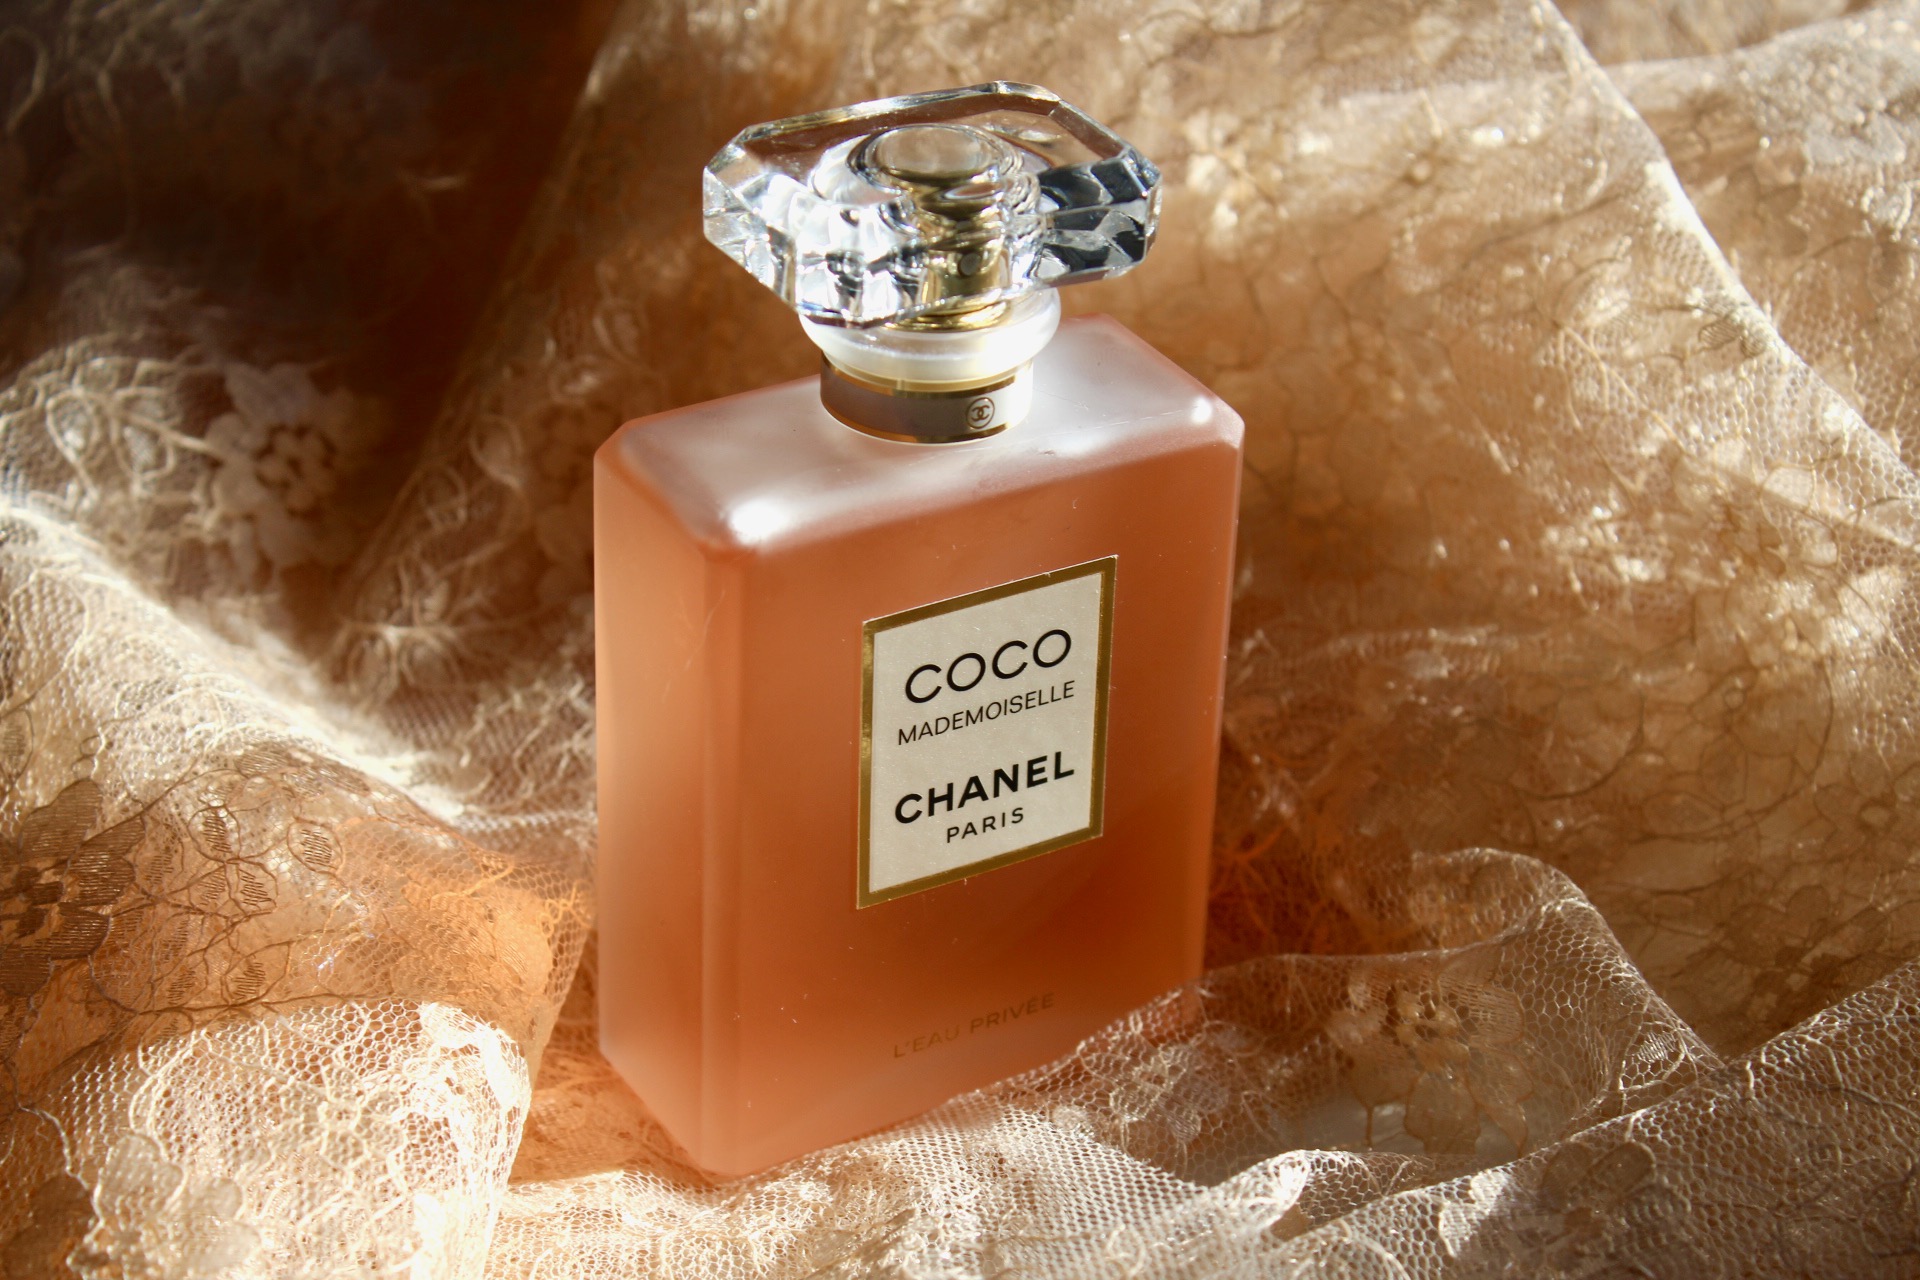 coco chanel mademoiselle offers